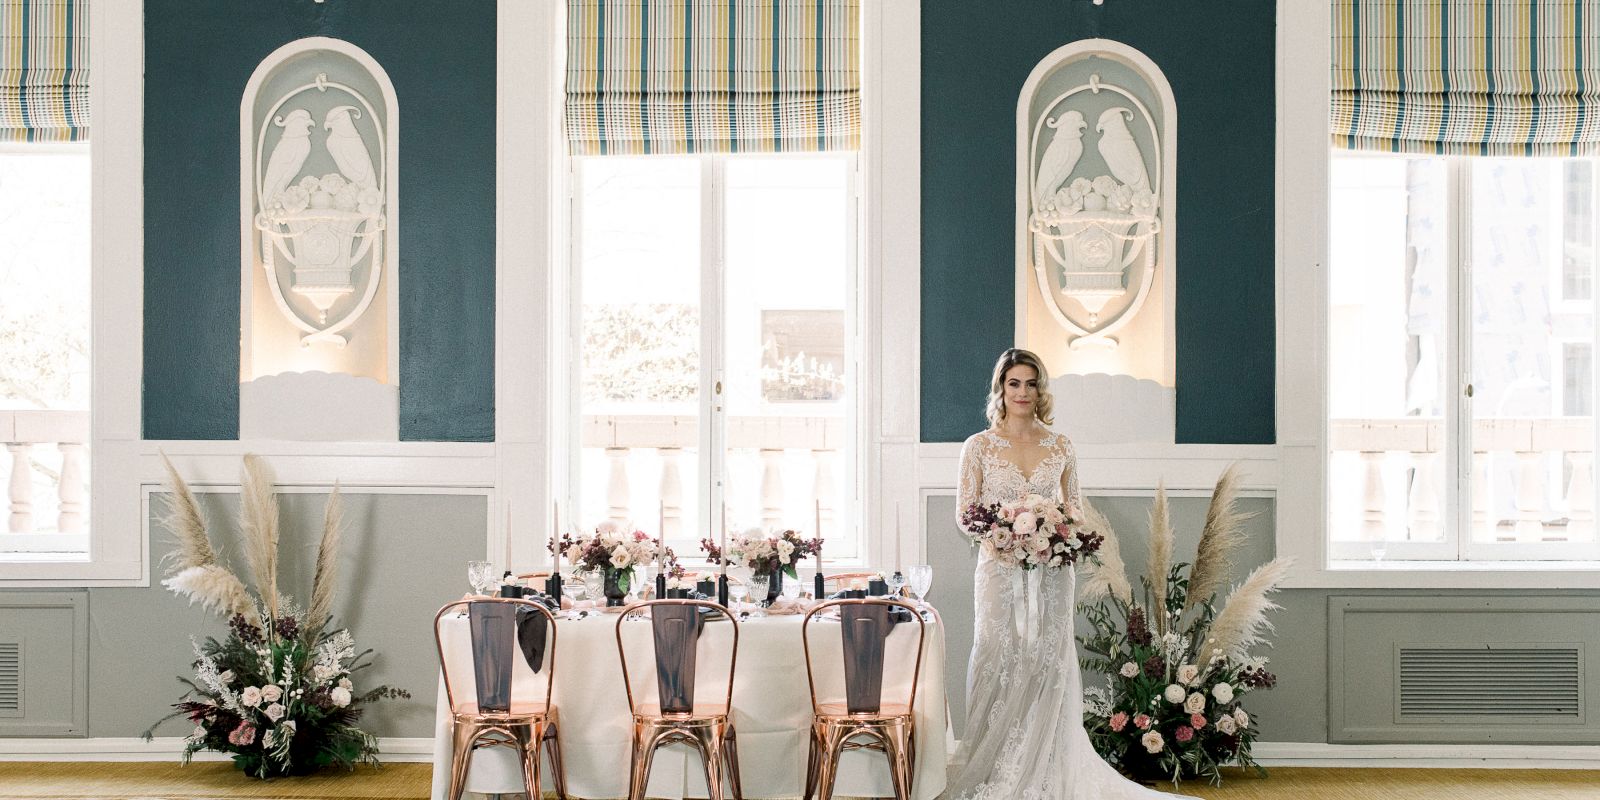 A bride in a wedding dress stands beside an elegantly set table with floral arrangements, in a room with ornate decor and large windows.